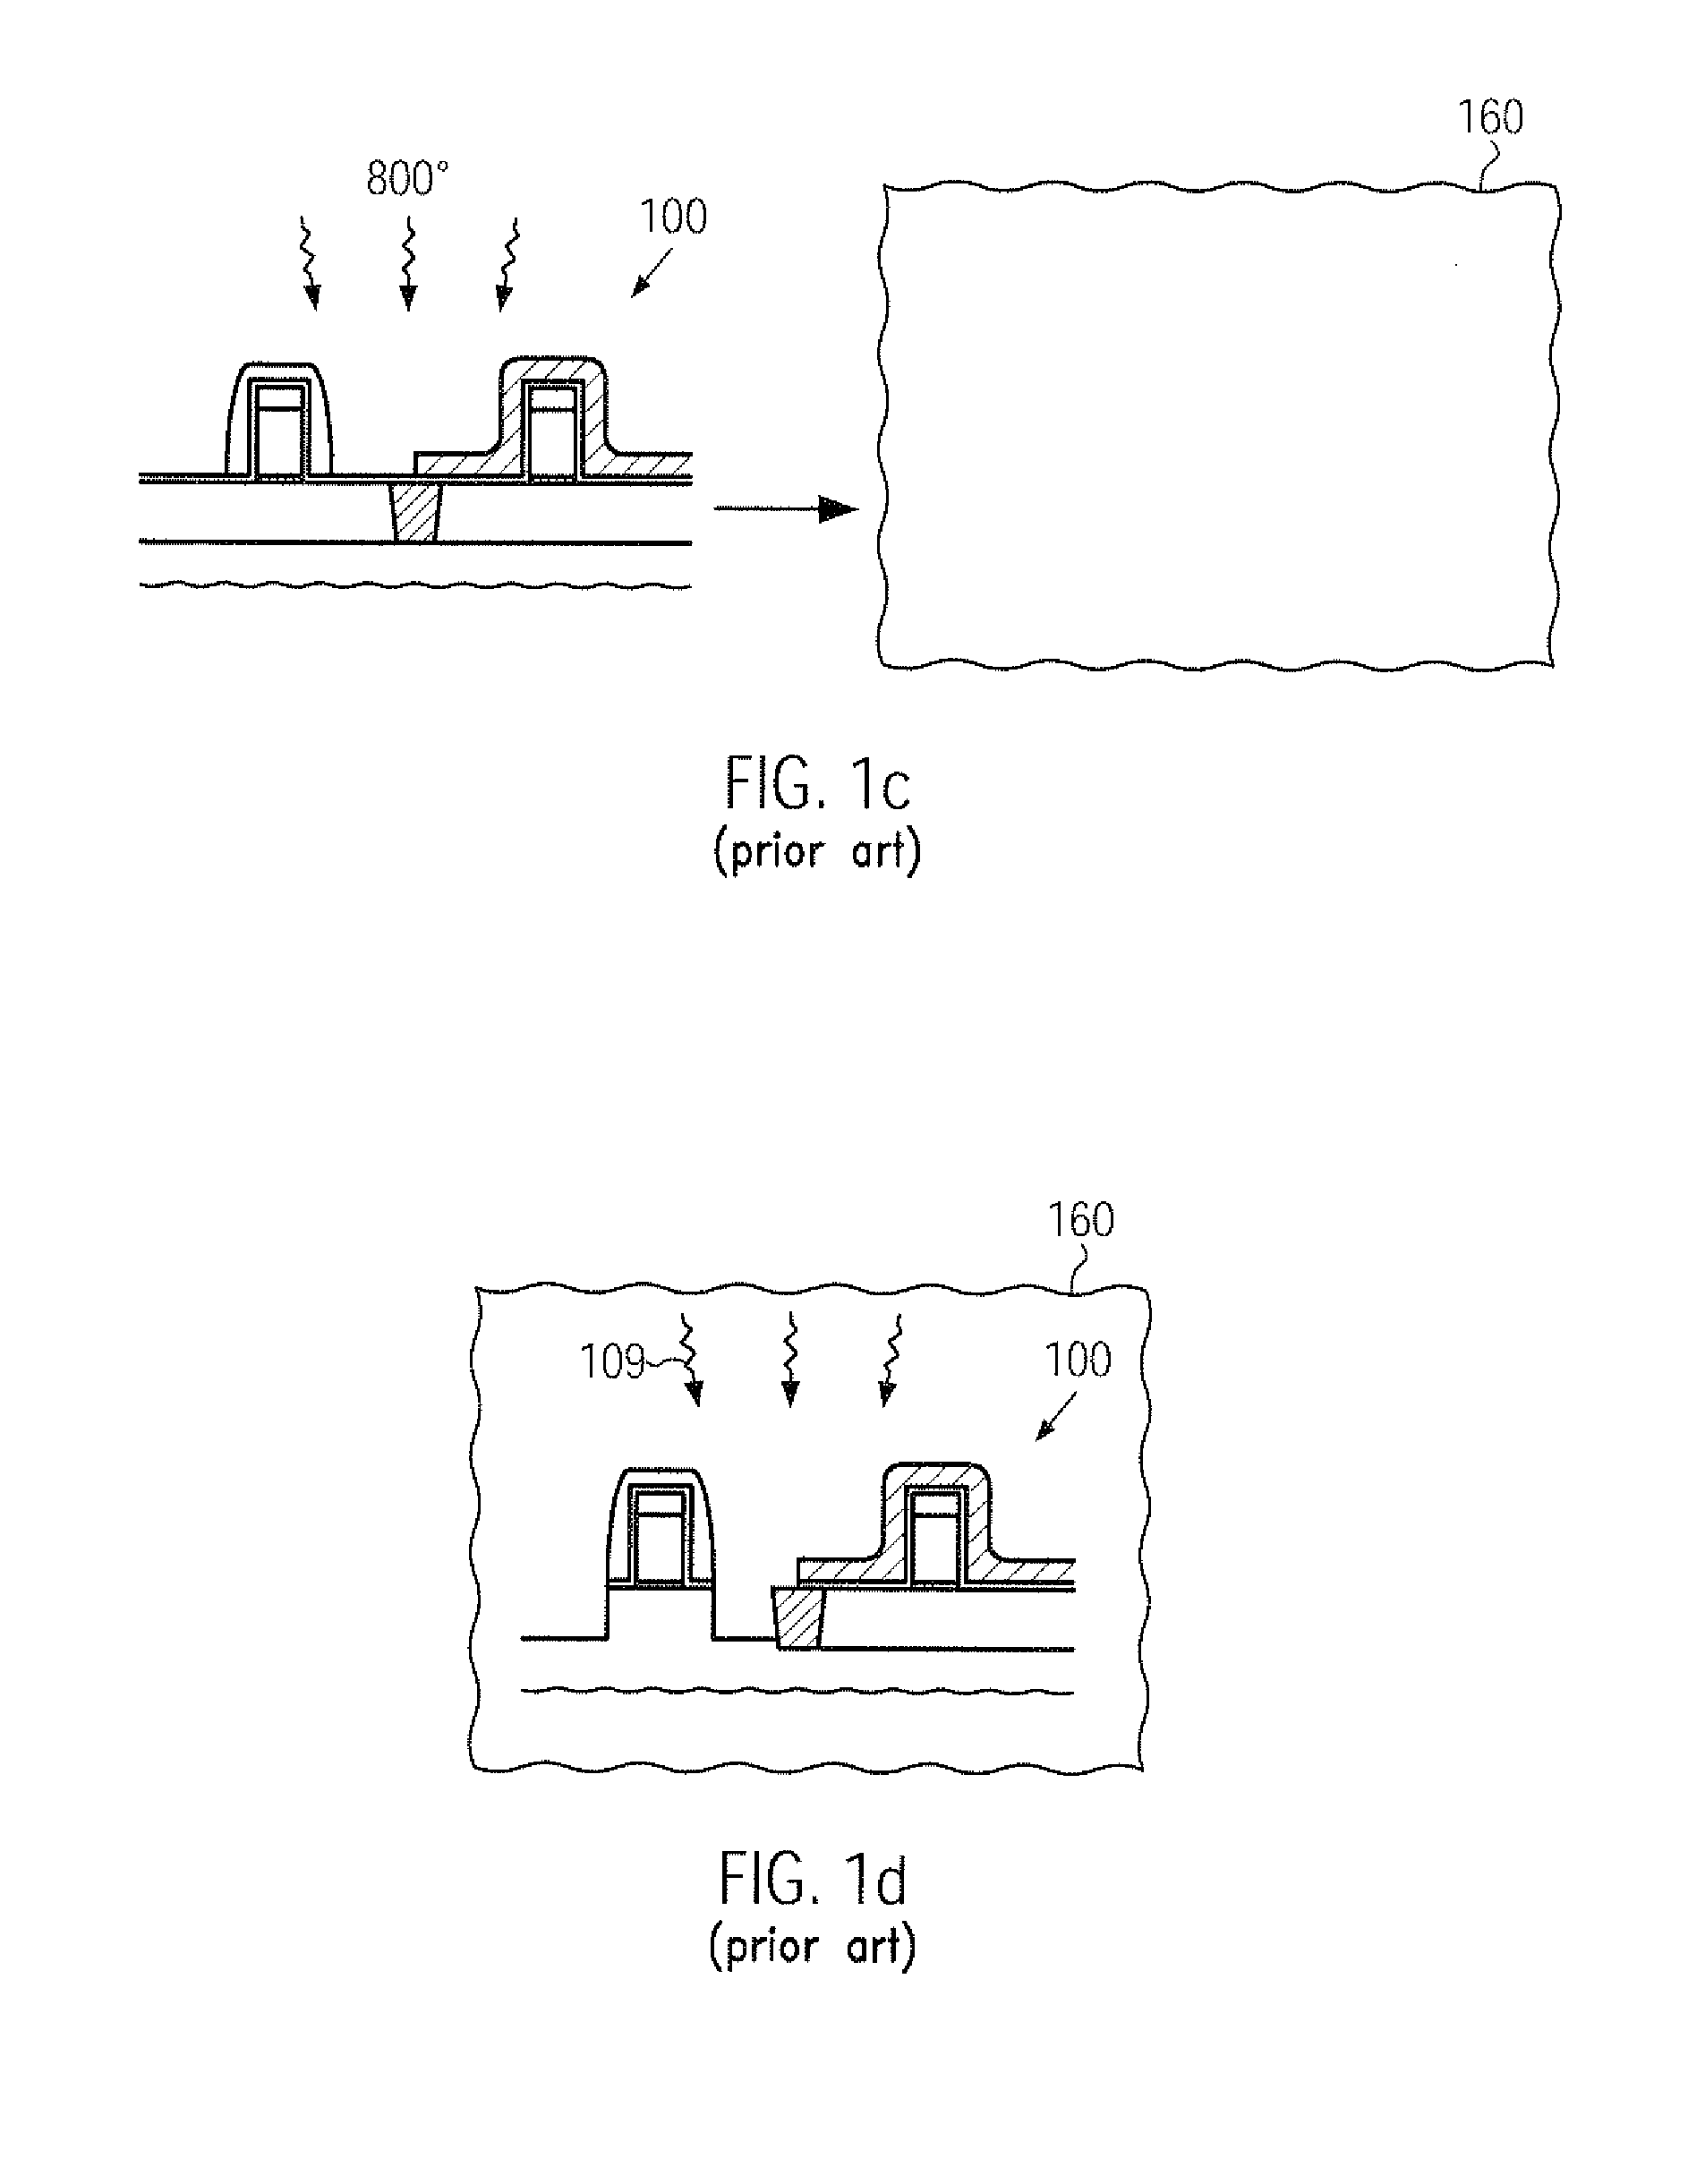 Transistor with embedded si/ge material having reduced offset to the channel region